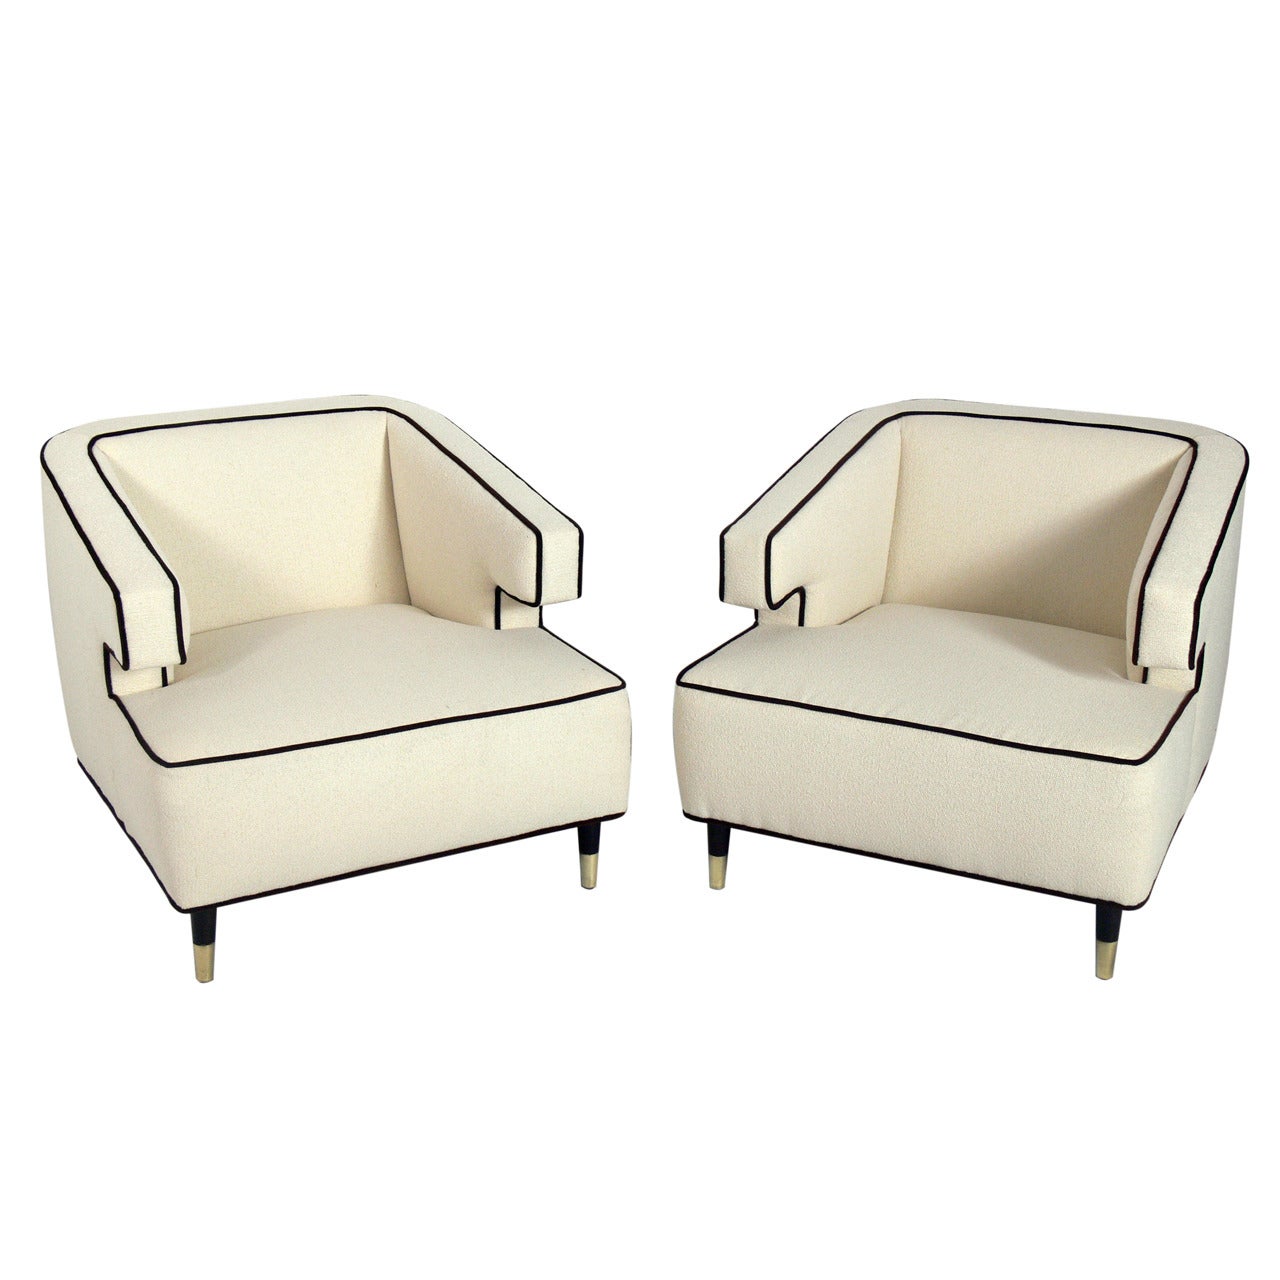 Pair of Substantial Modern Lounge Chairs with Great Lines